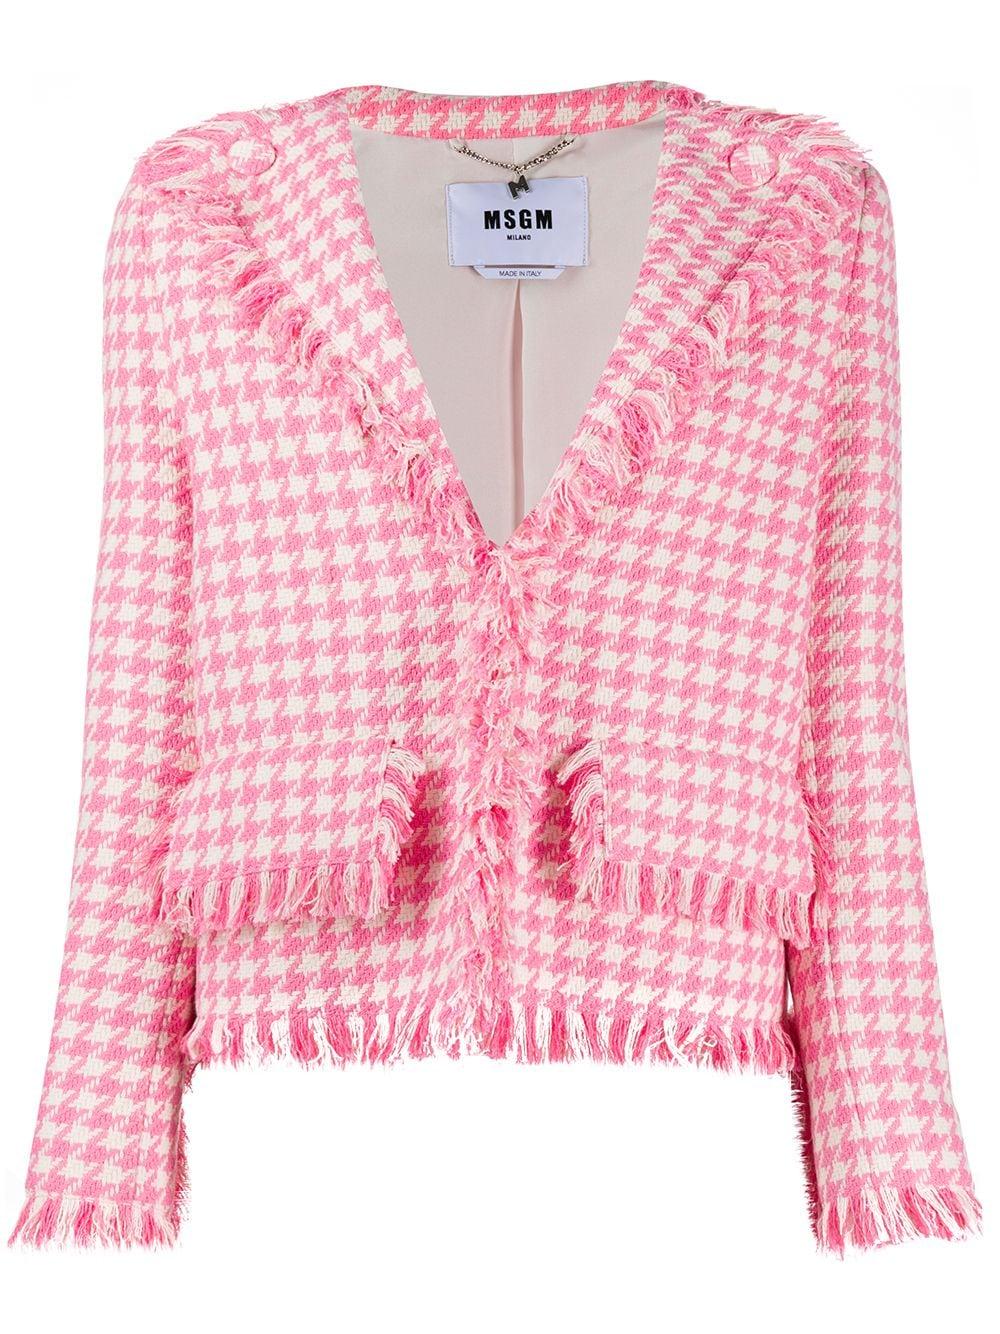 MSGM Synthetic Houndstooth Tweed Jacket in Pink - Lyst